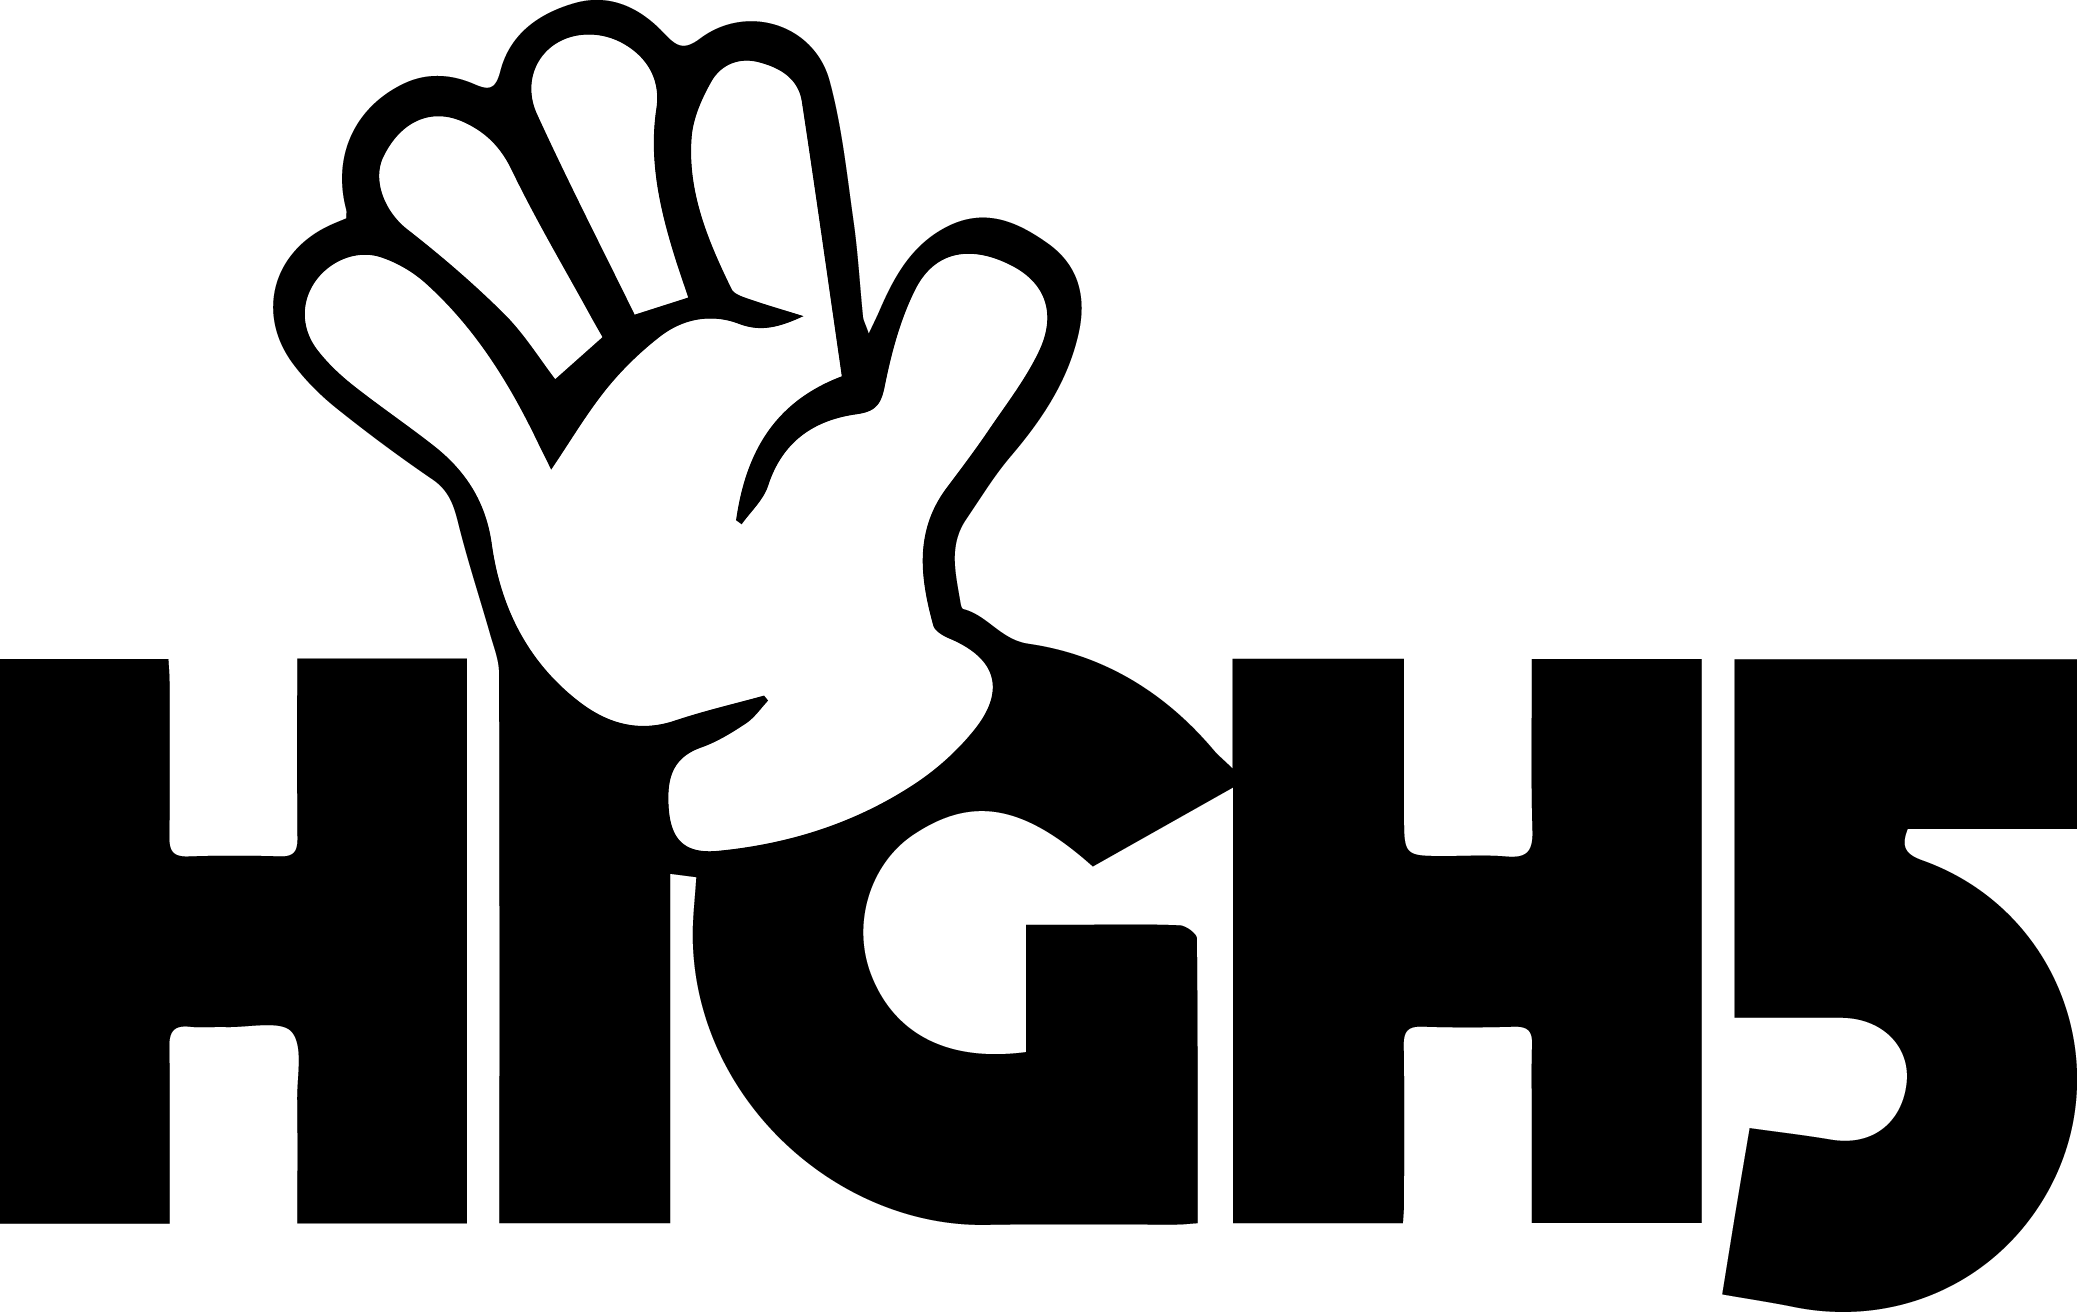 High Five Cliparts.co